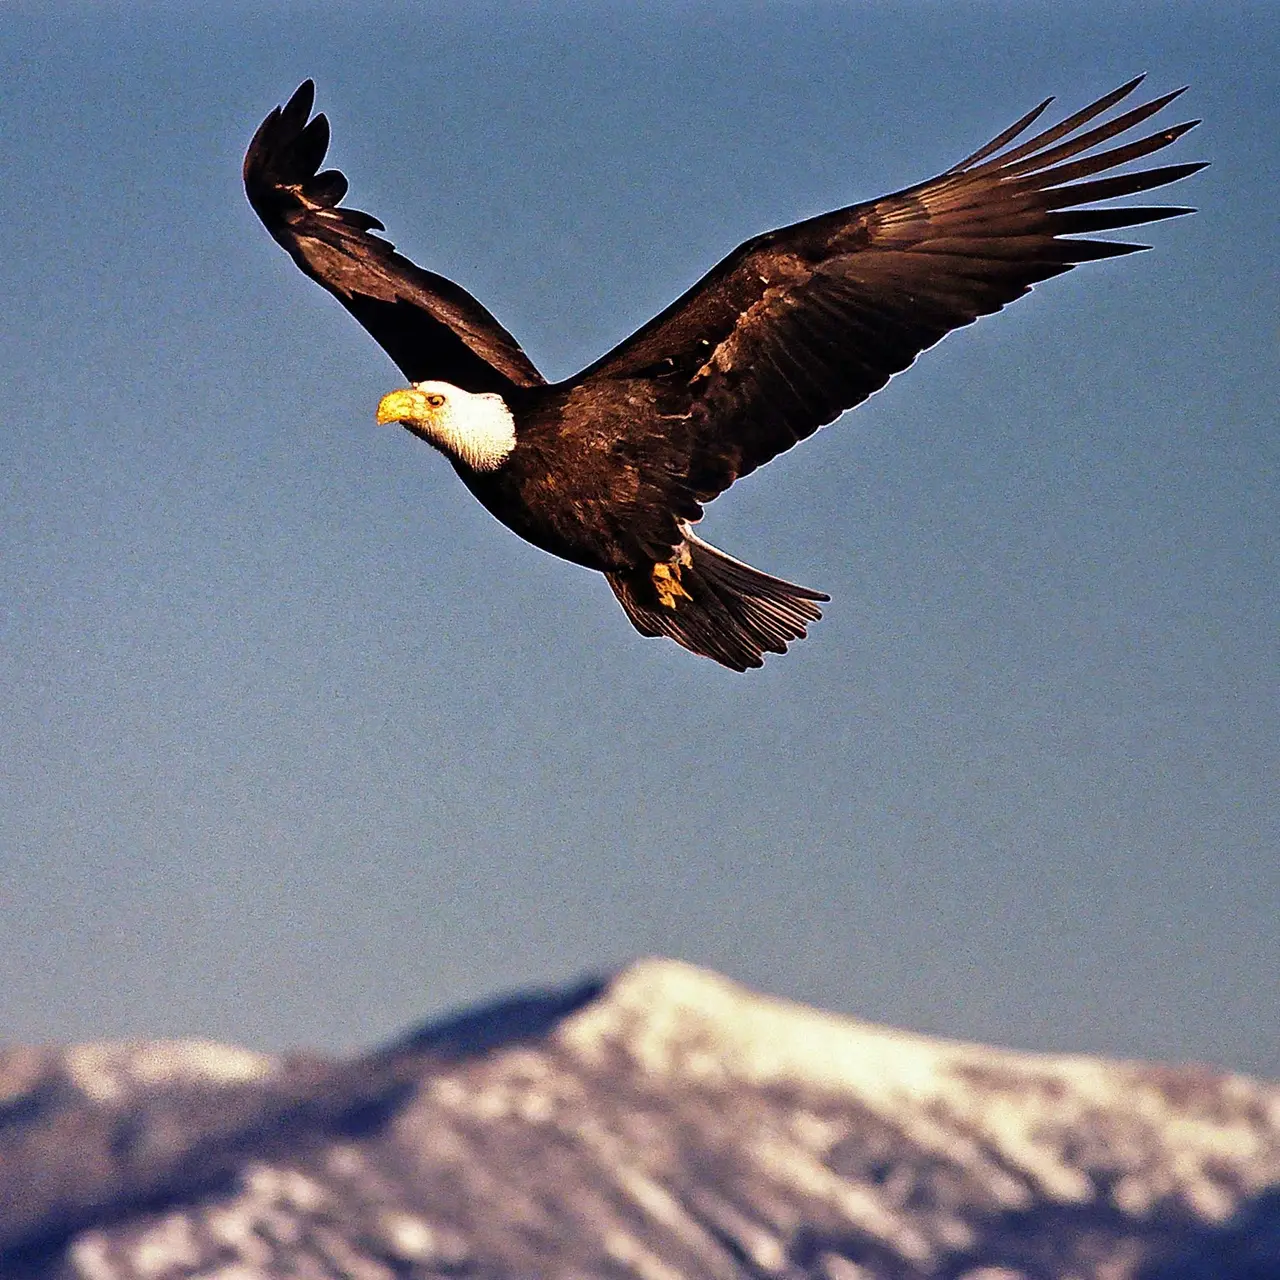 An eagle soaring high above mountaintops against a clear sky. 35mm stock photo